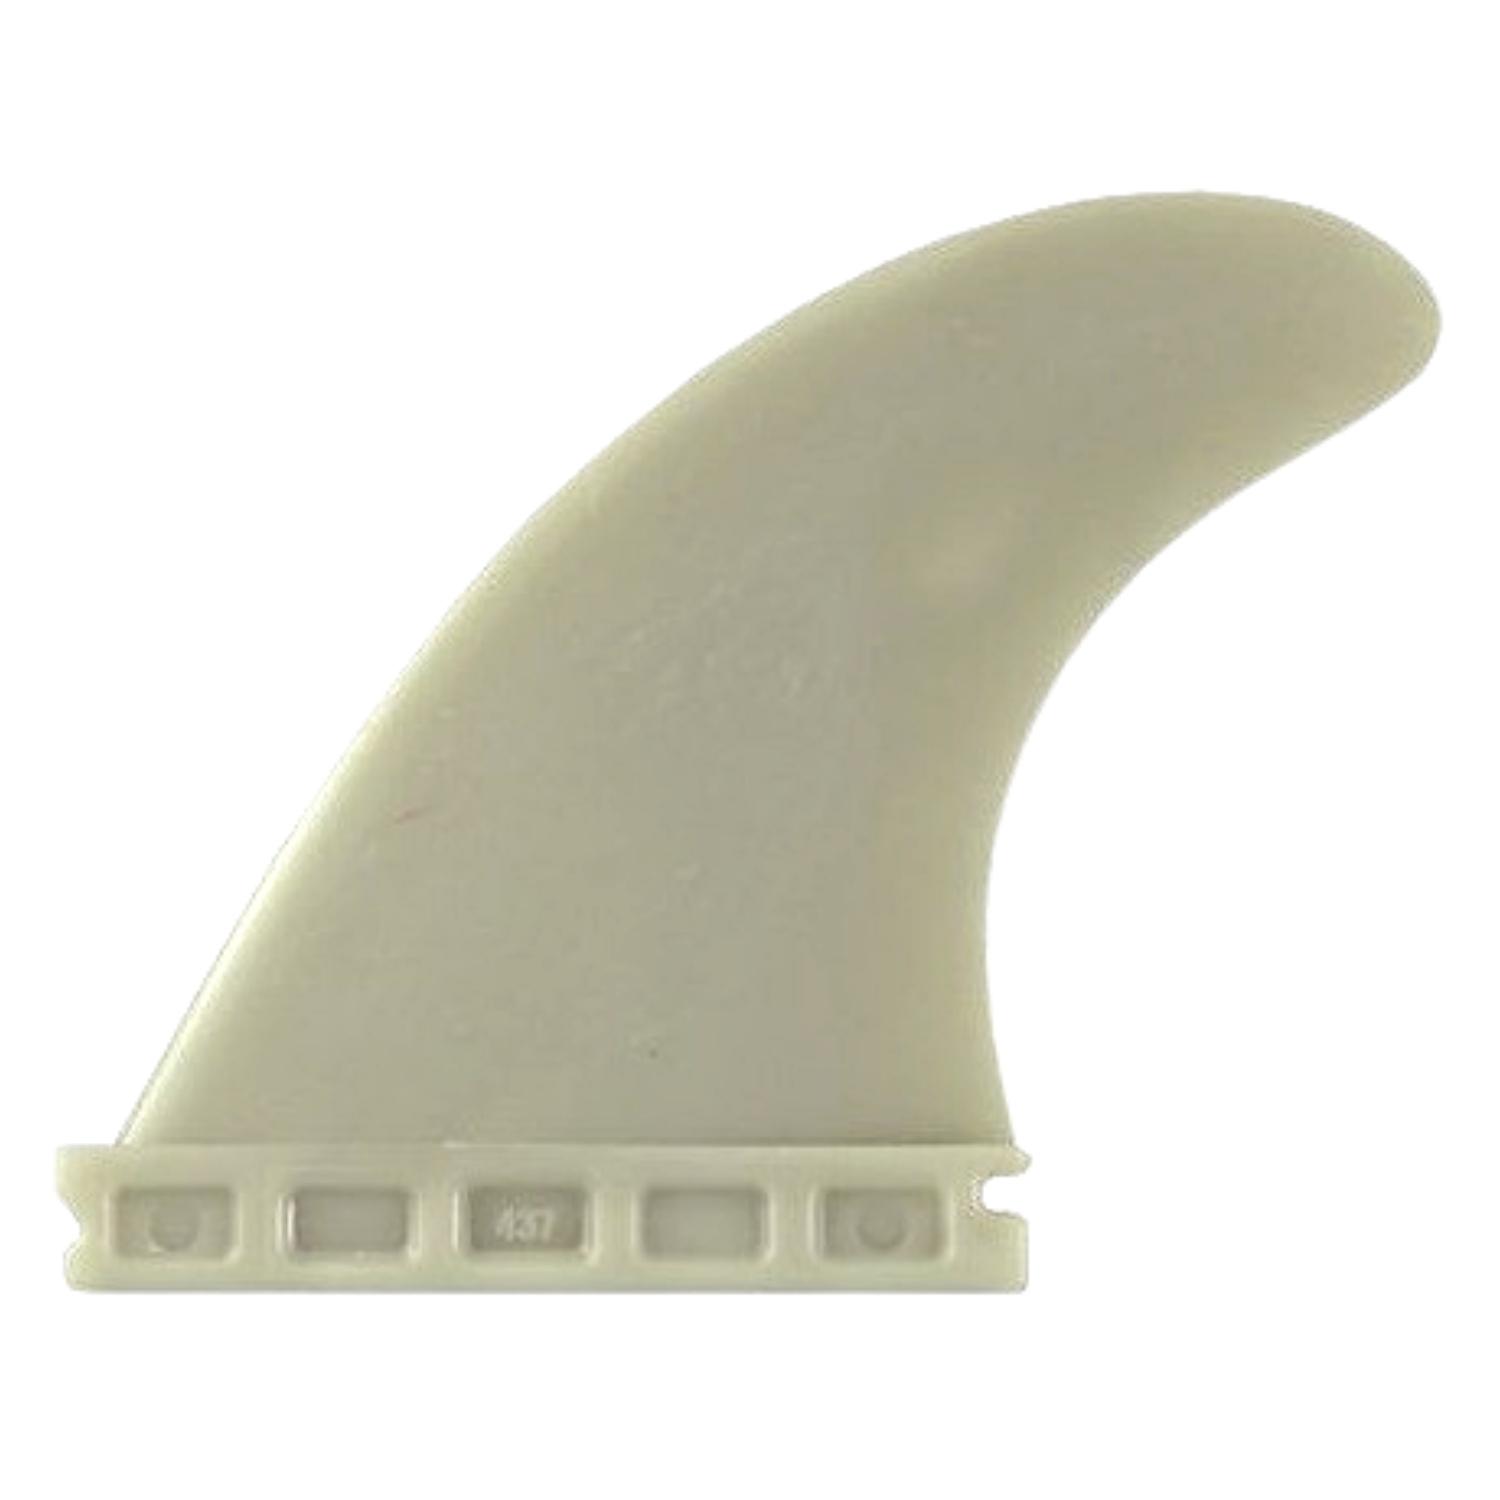 Northcore Futures Compatible F4 Surfboard Fins - Bone - Futures Fins by Northcore Small Fins